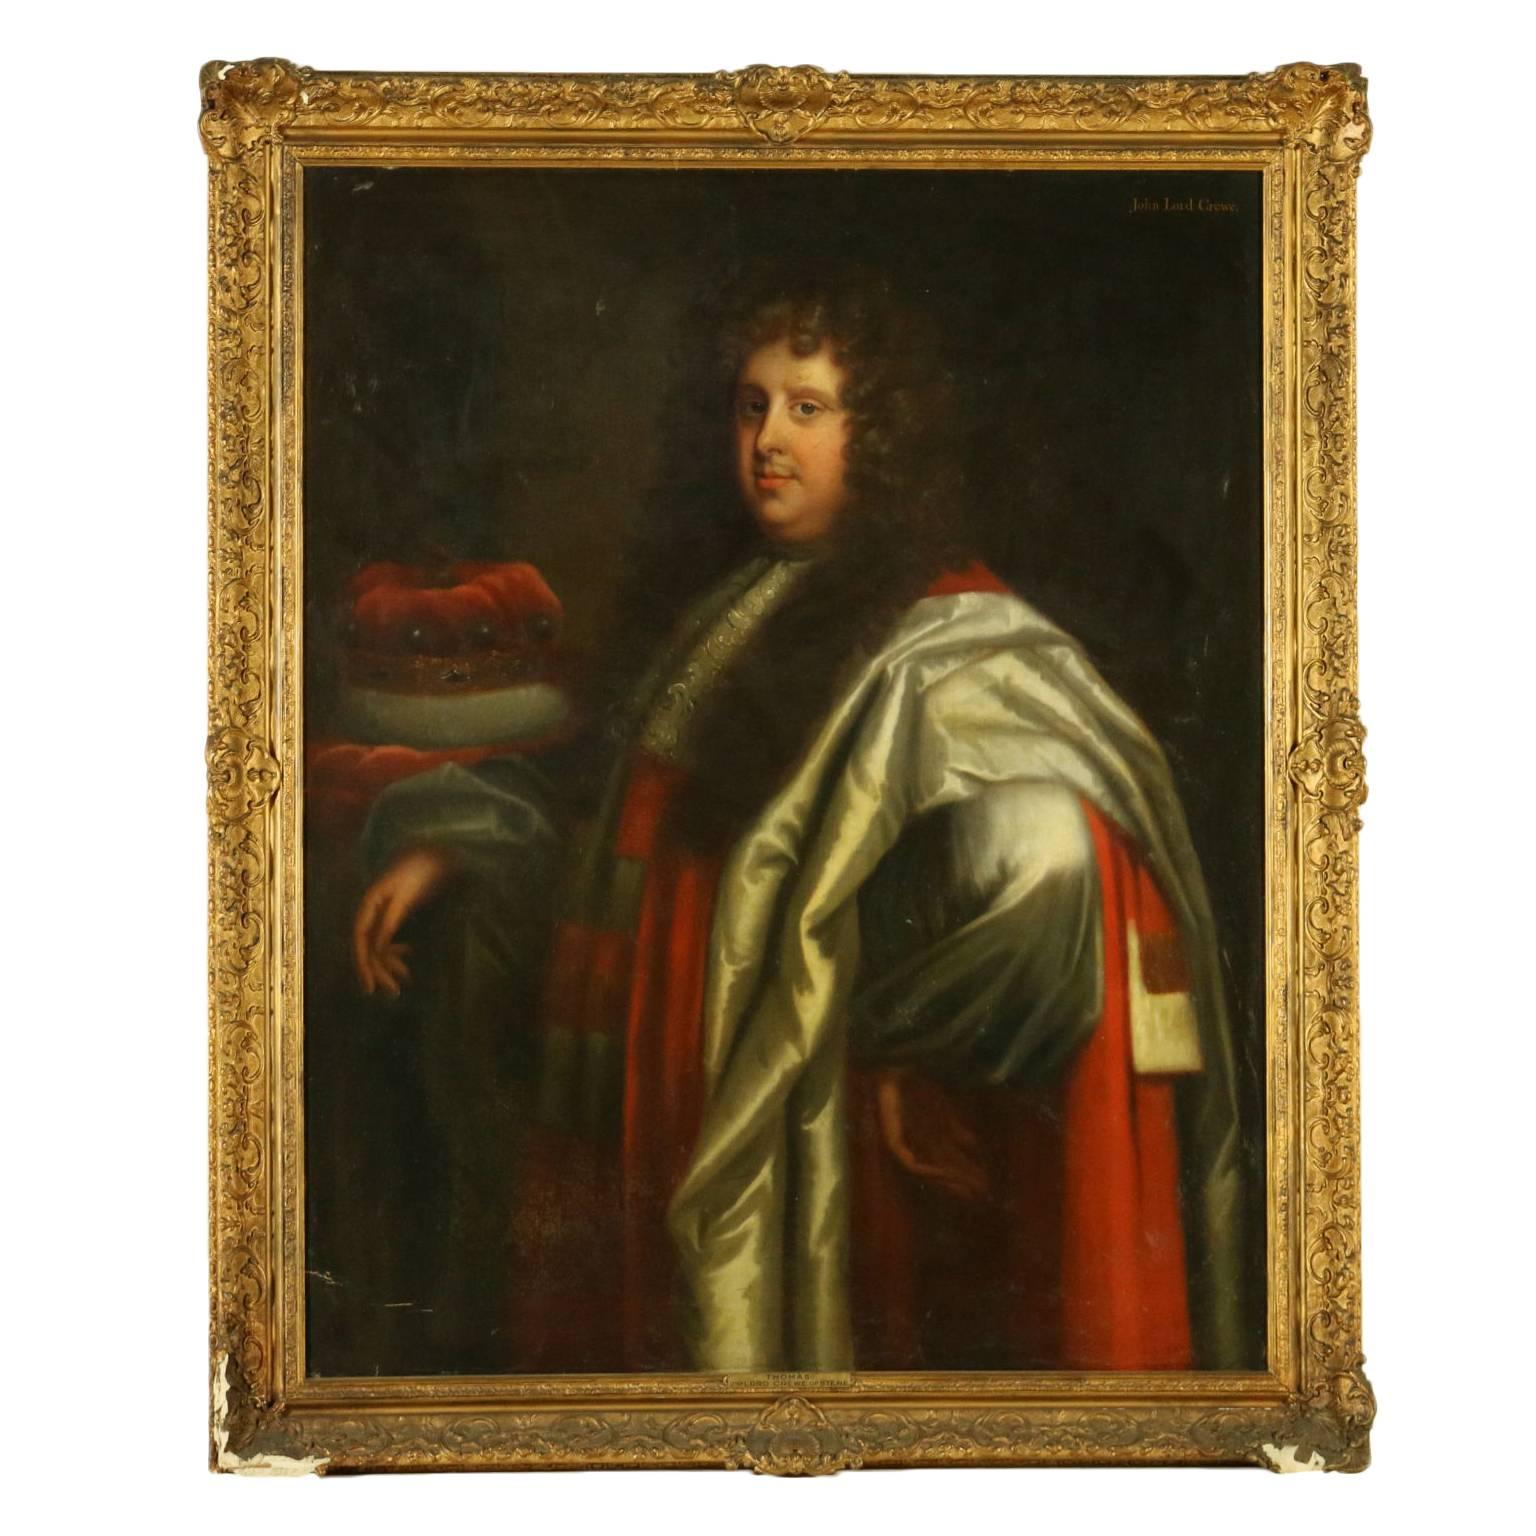 Unknown Portrait Painting - Portrait of Lord Crewe Setting of Peter Lely Oil on Canvas Mid 1600